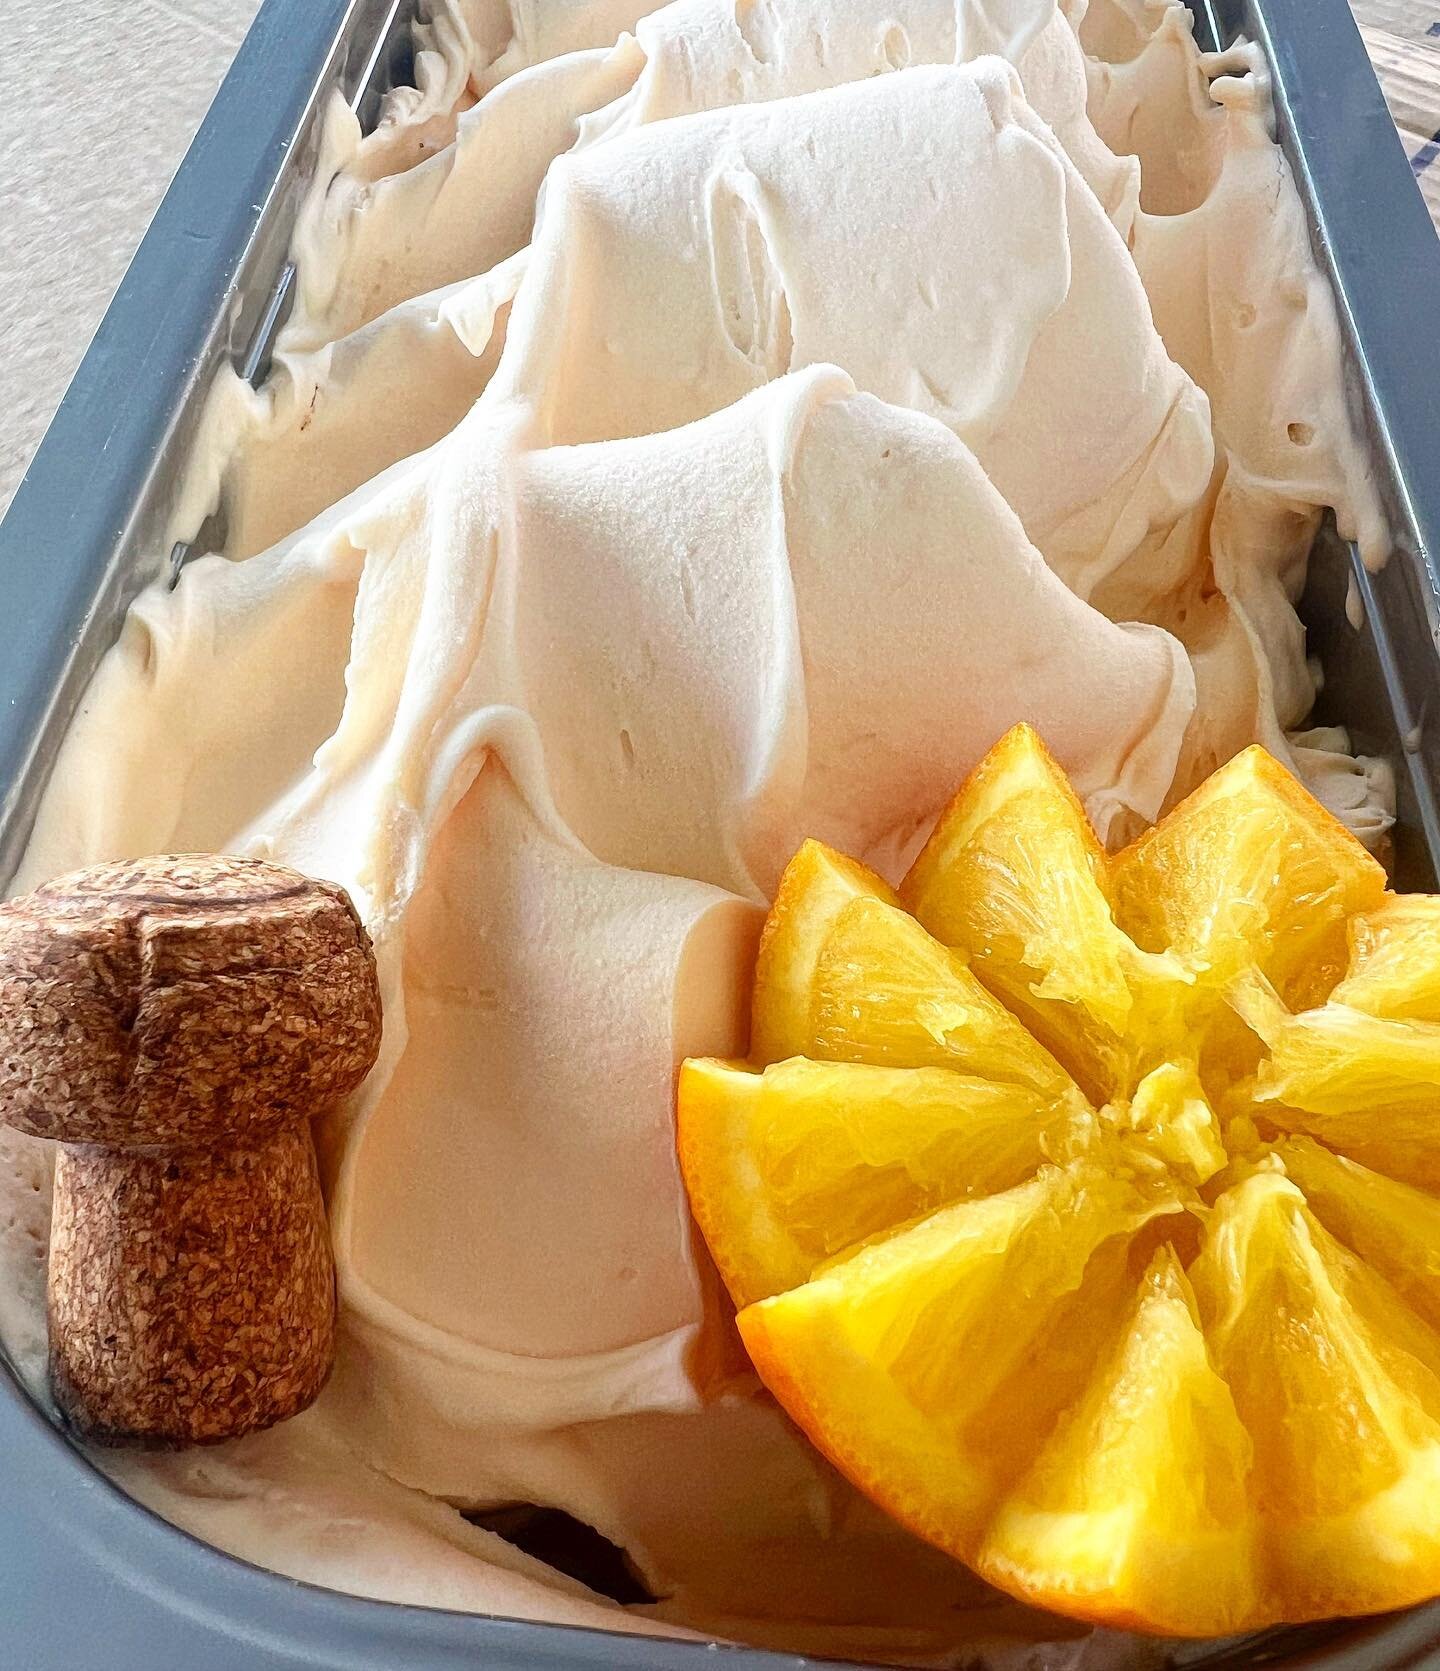 We&rsquo;re starting off 2023 with Champagne in Sorbet form 🍾🍨🎆

Fresh house juiced oranges 🍊 with champagne 🍾 gives you our 
Mimosa Sorbet 🍨🍊🍾
(Orange Champagne)

Celebrate the New Year, New You, Same You or New Flavor with us 💯🍾🍨

This s